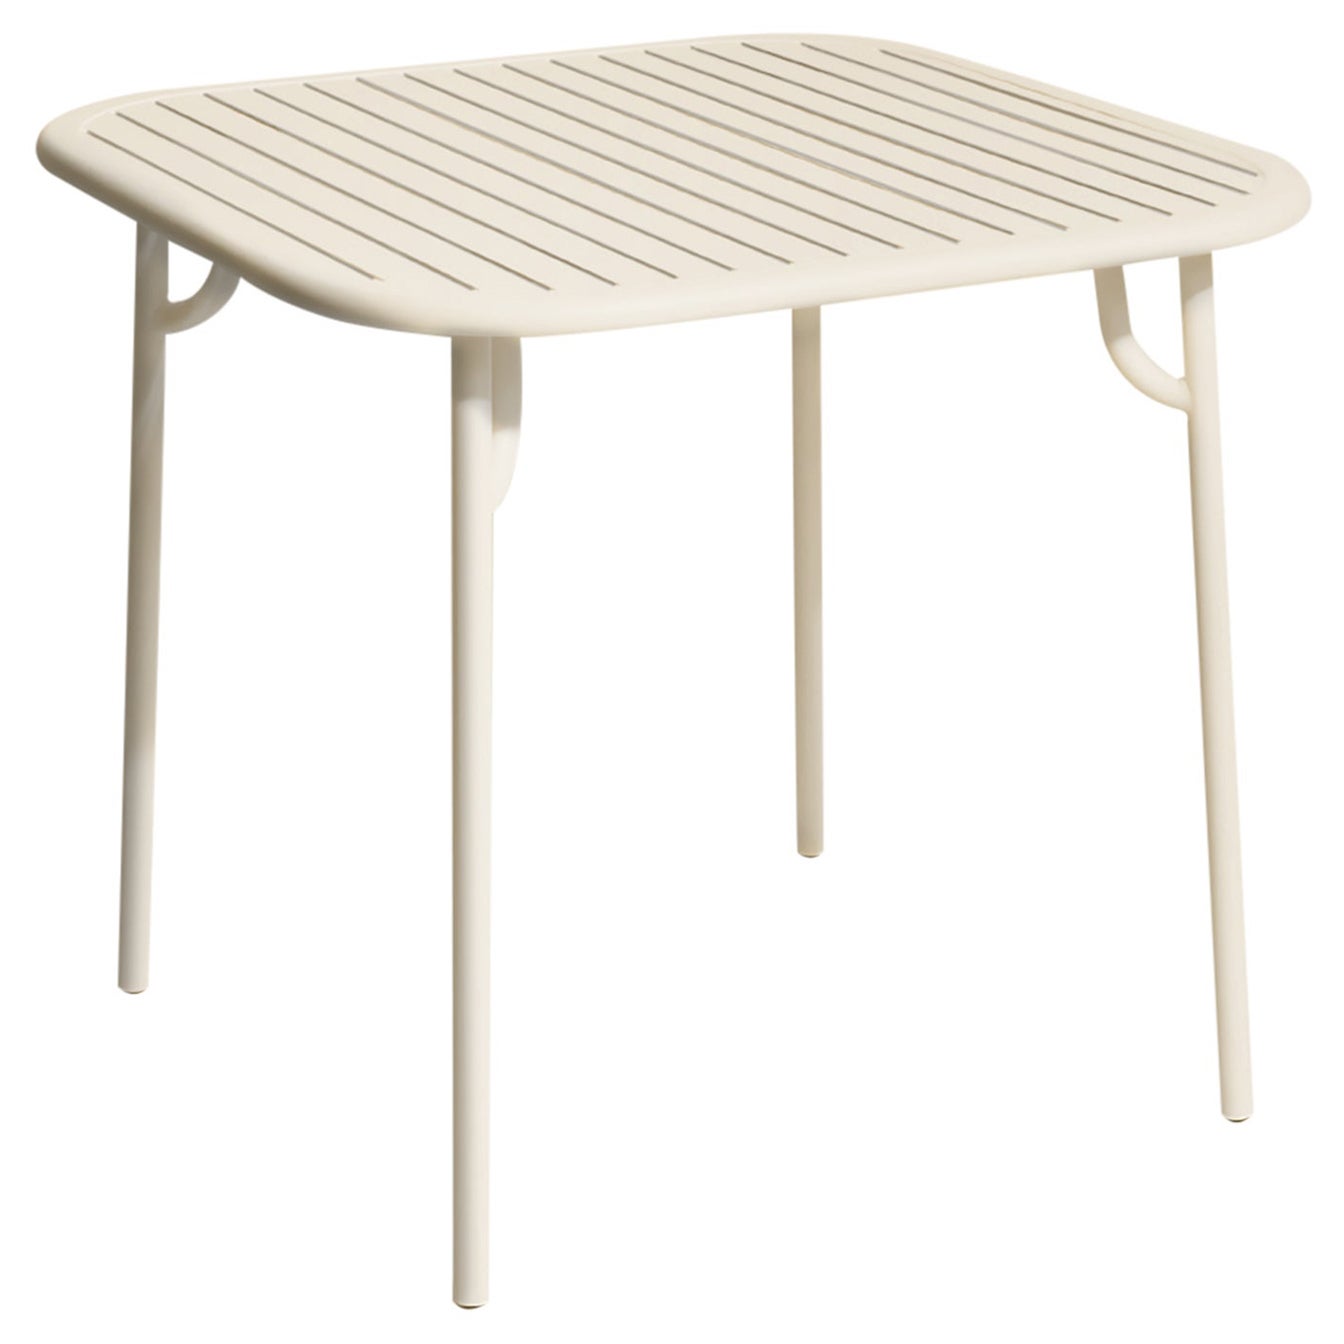 Petite Friture Week-End Square Dining Table in Ivory Aluminium with Slats For Sale